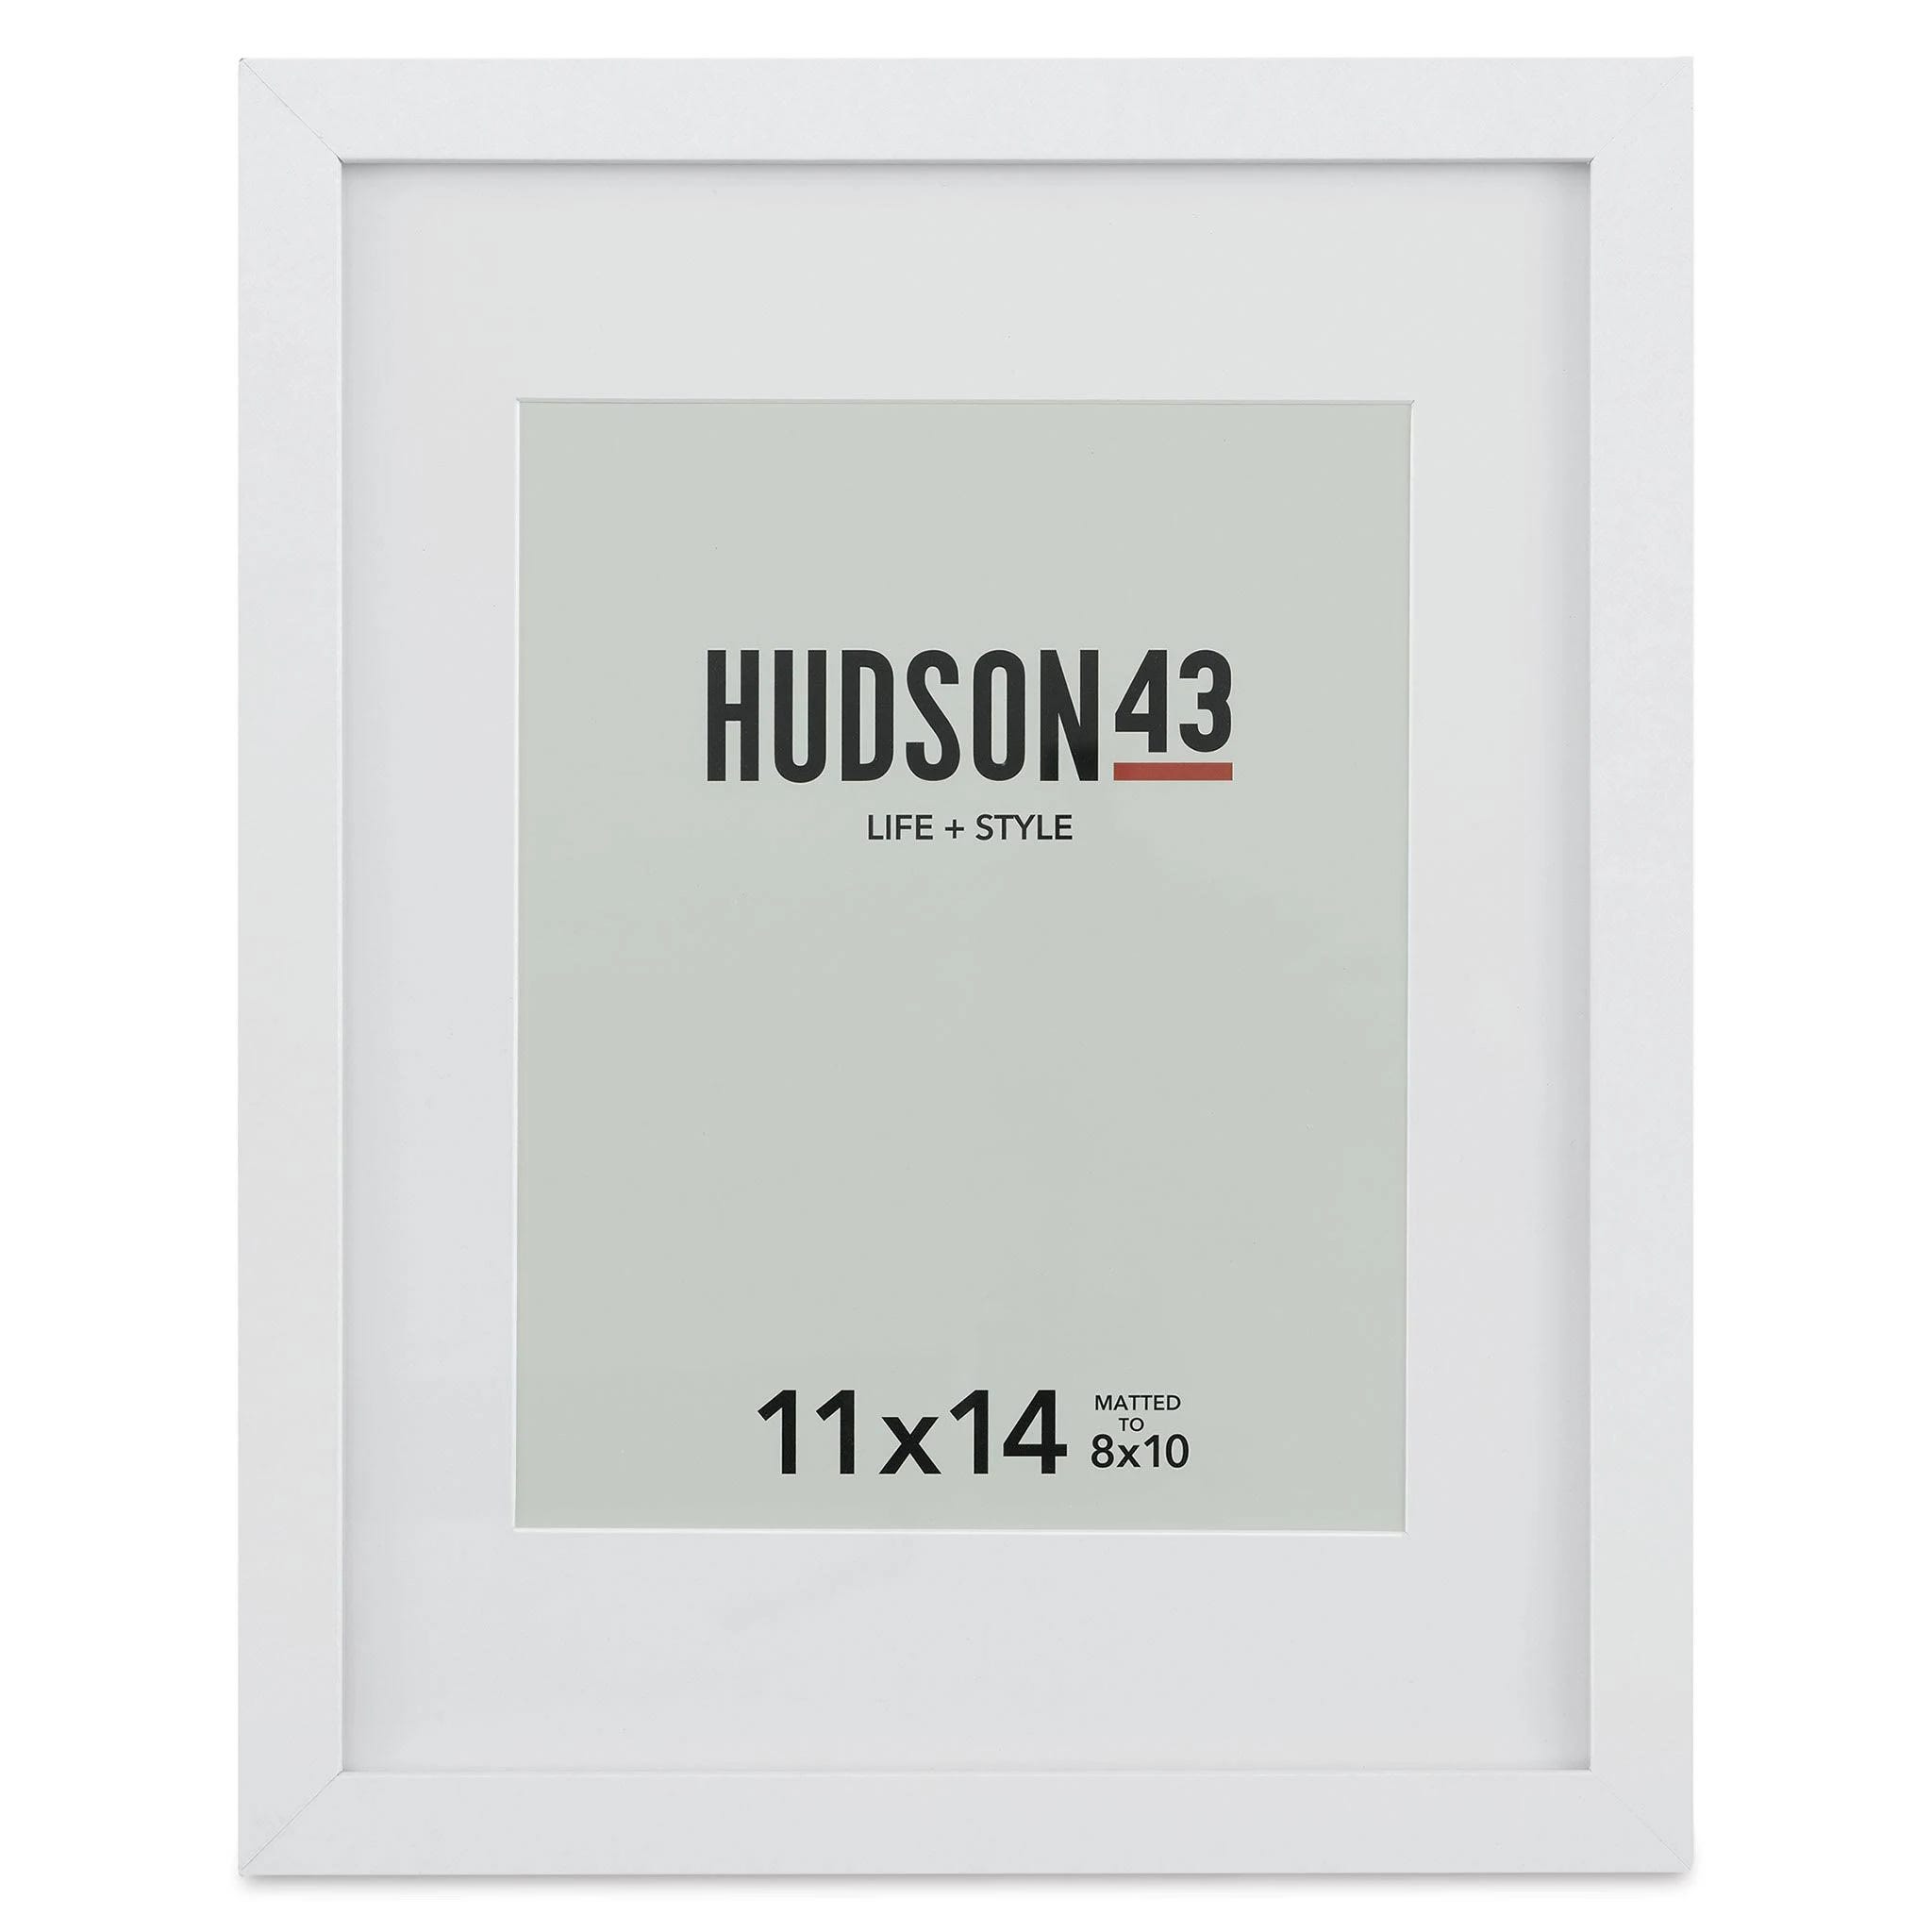 Hudson 43 White Gallery Frames for Decorating Walls | Image